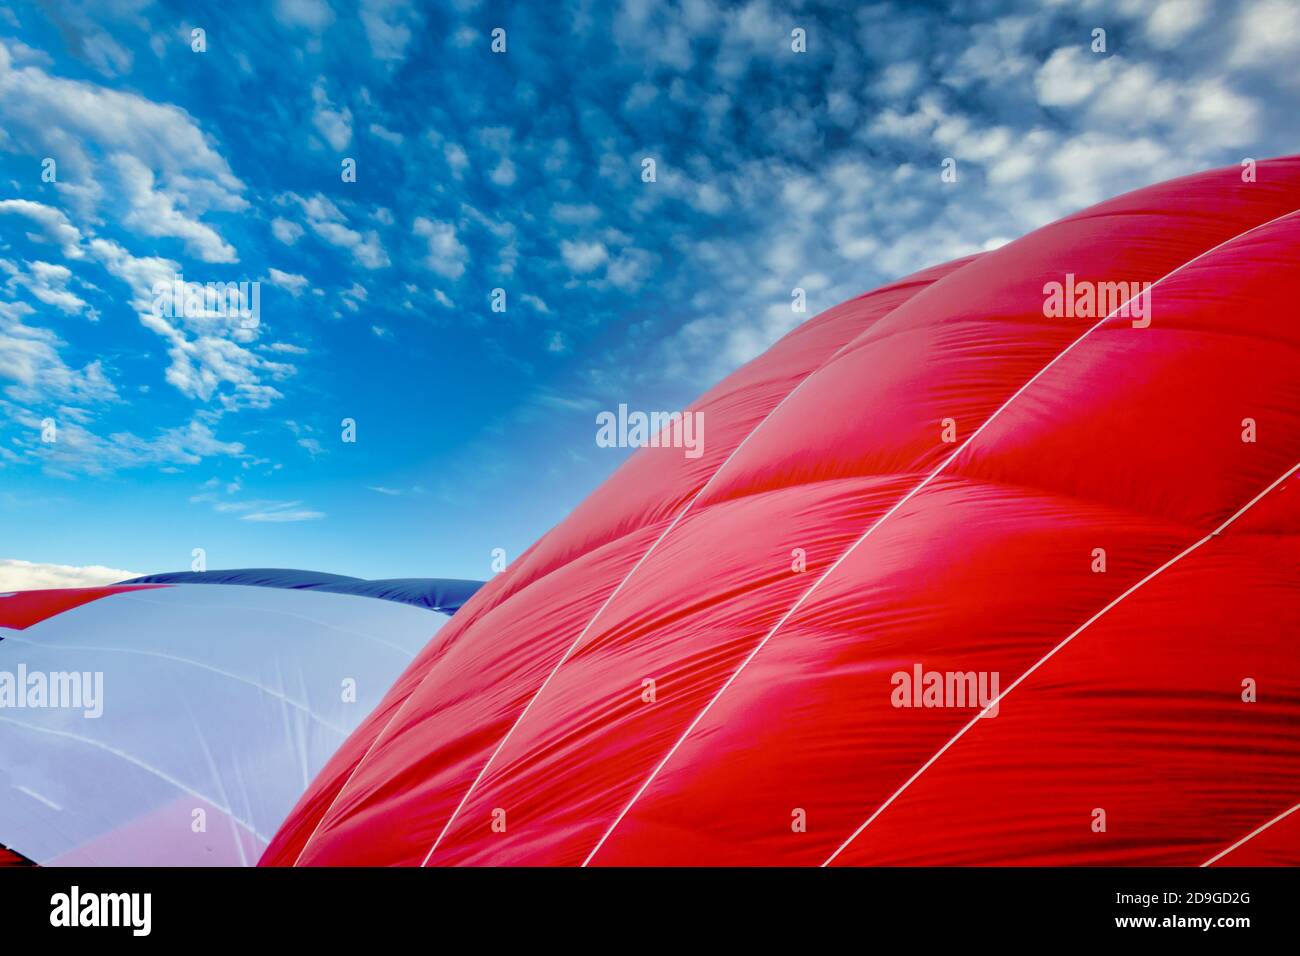 red and blue white balloon against blue sky Stock Photo